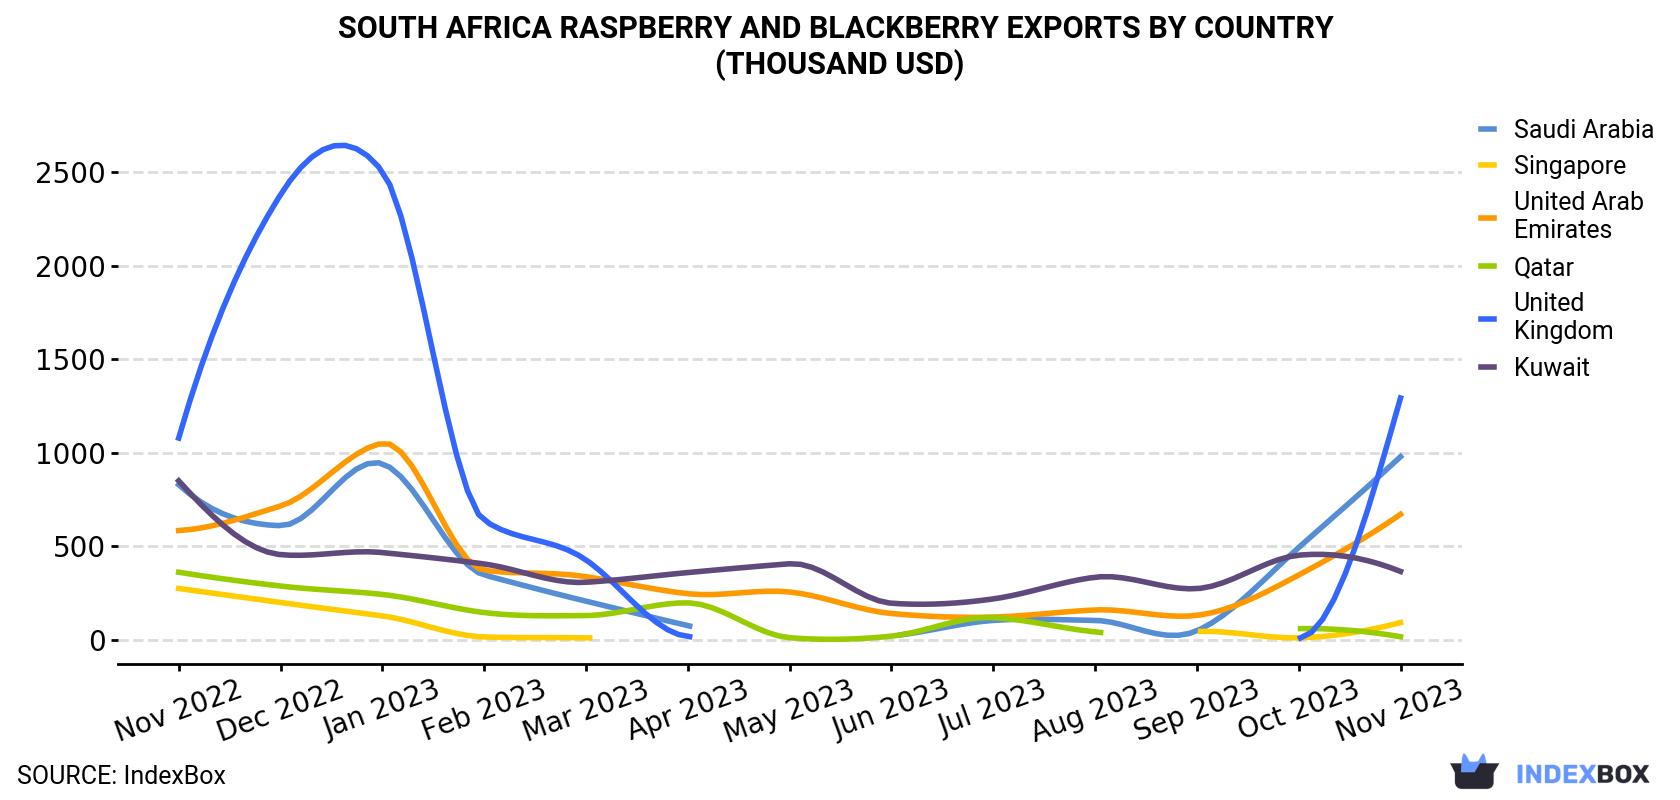 South Africa Raspberry And Blackberry Exports By Country (Thousand USD)